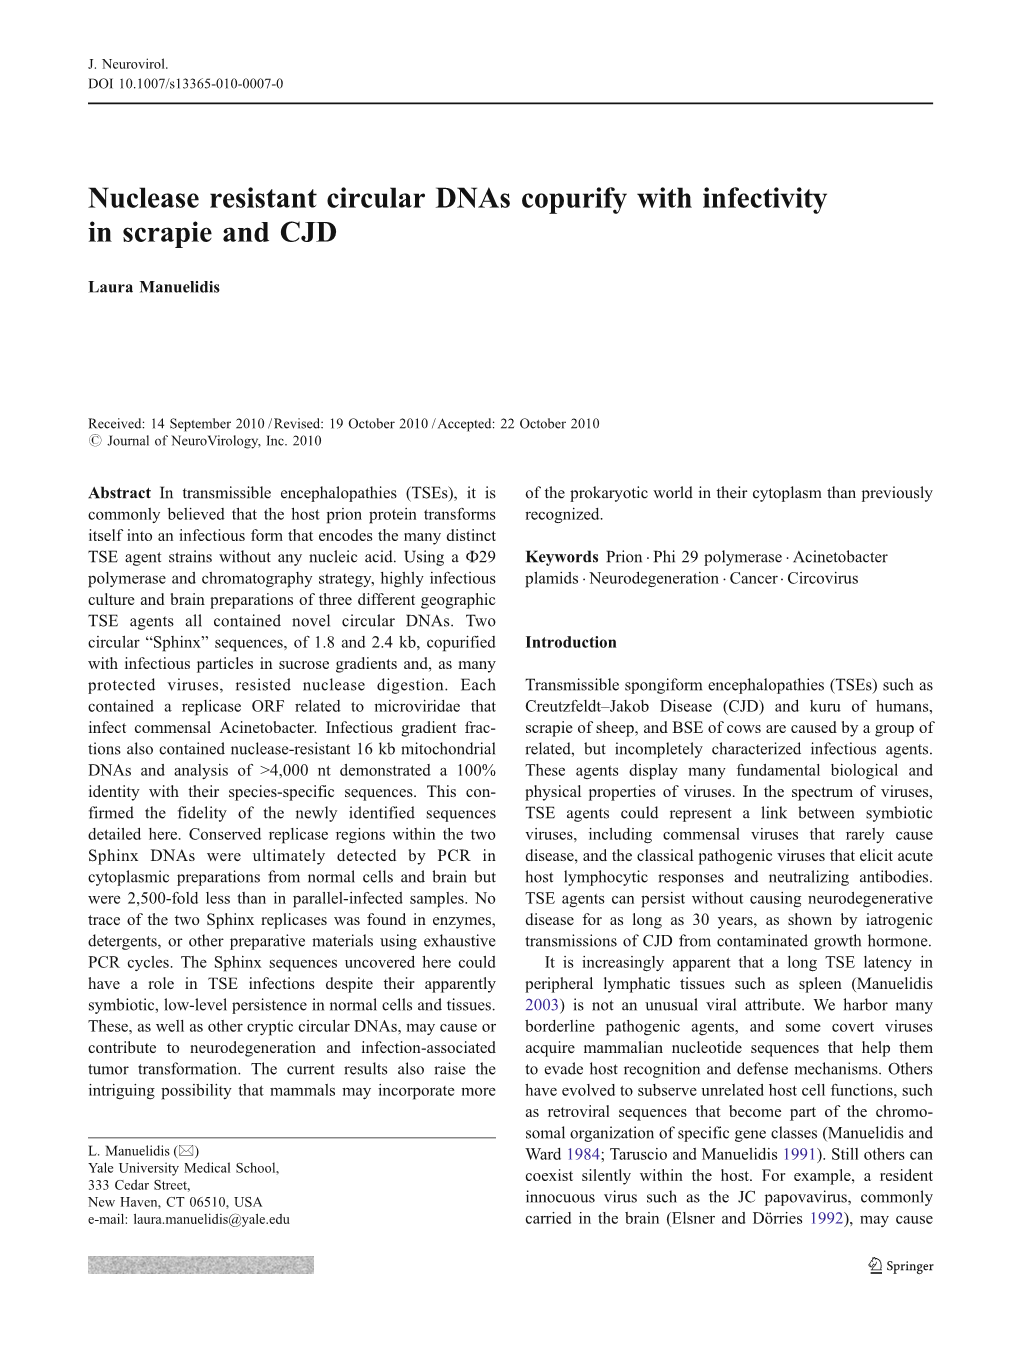 Nuclease Resistant Circular Dnas Copurify with Infectivity in Scrapie and CJD